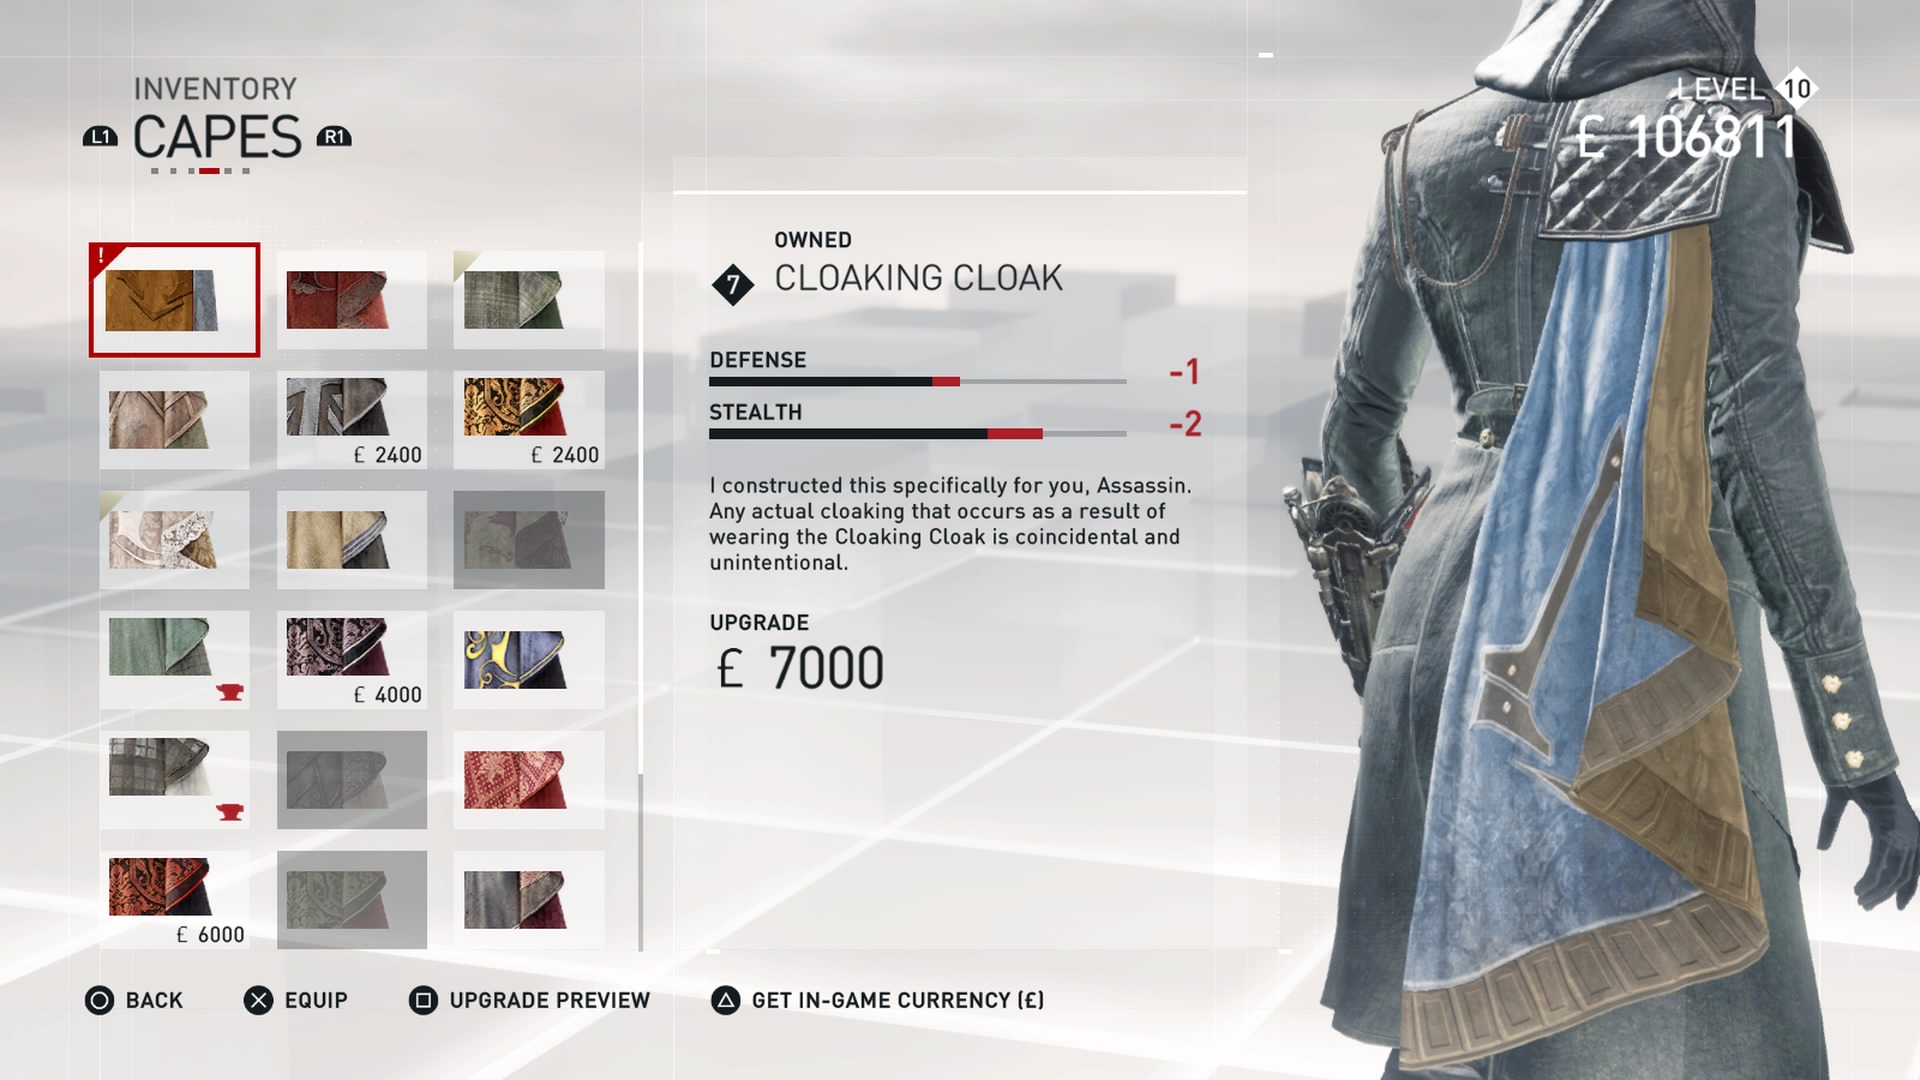 New Steampunk Outfits For Assassin’s Creed Syndicate Are Nearly 1GB Each To Download